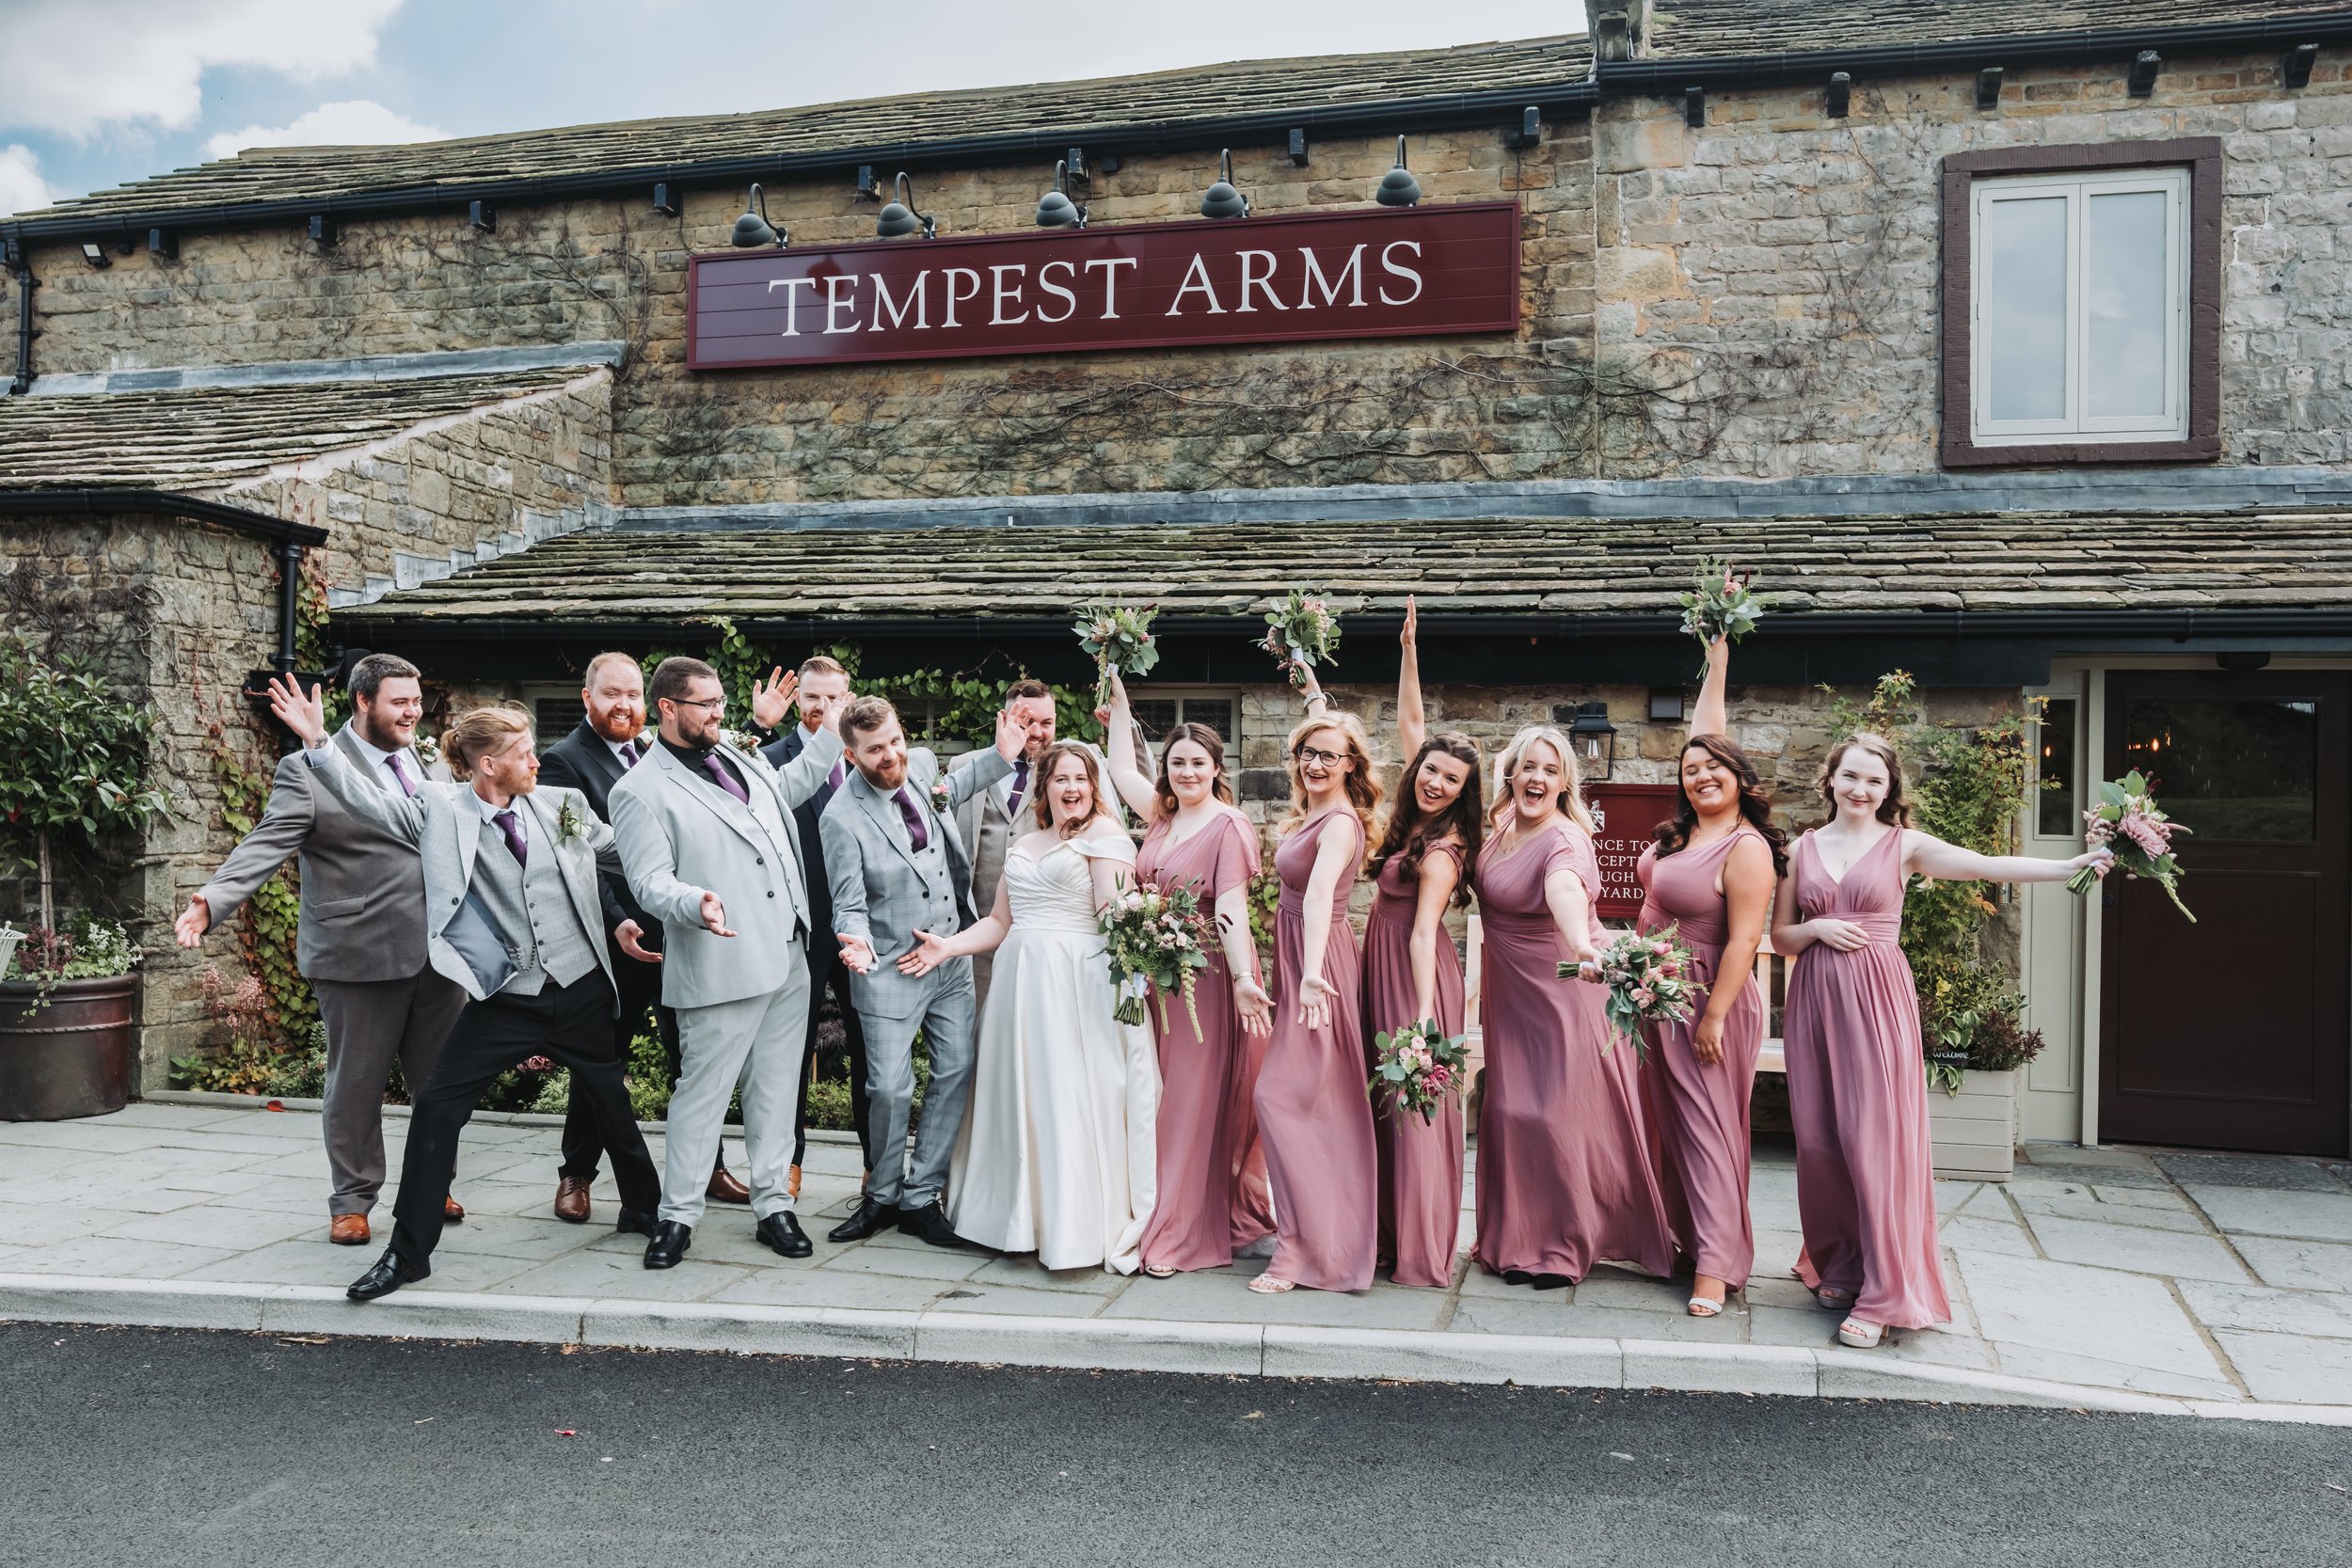 Tempest Arms venue-Bride and groom-group photo.jpg